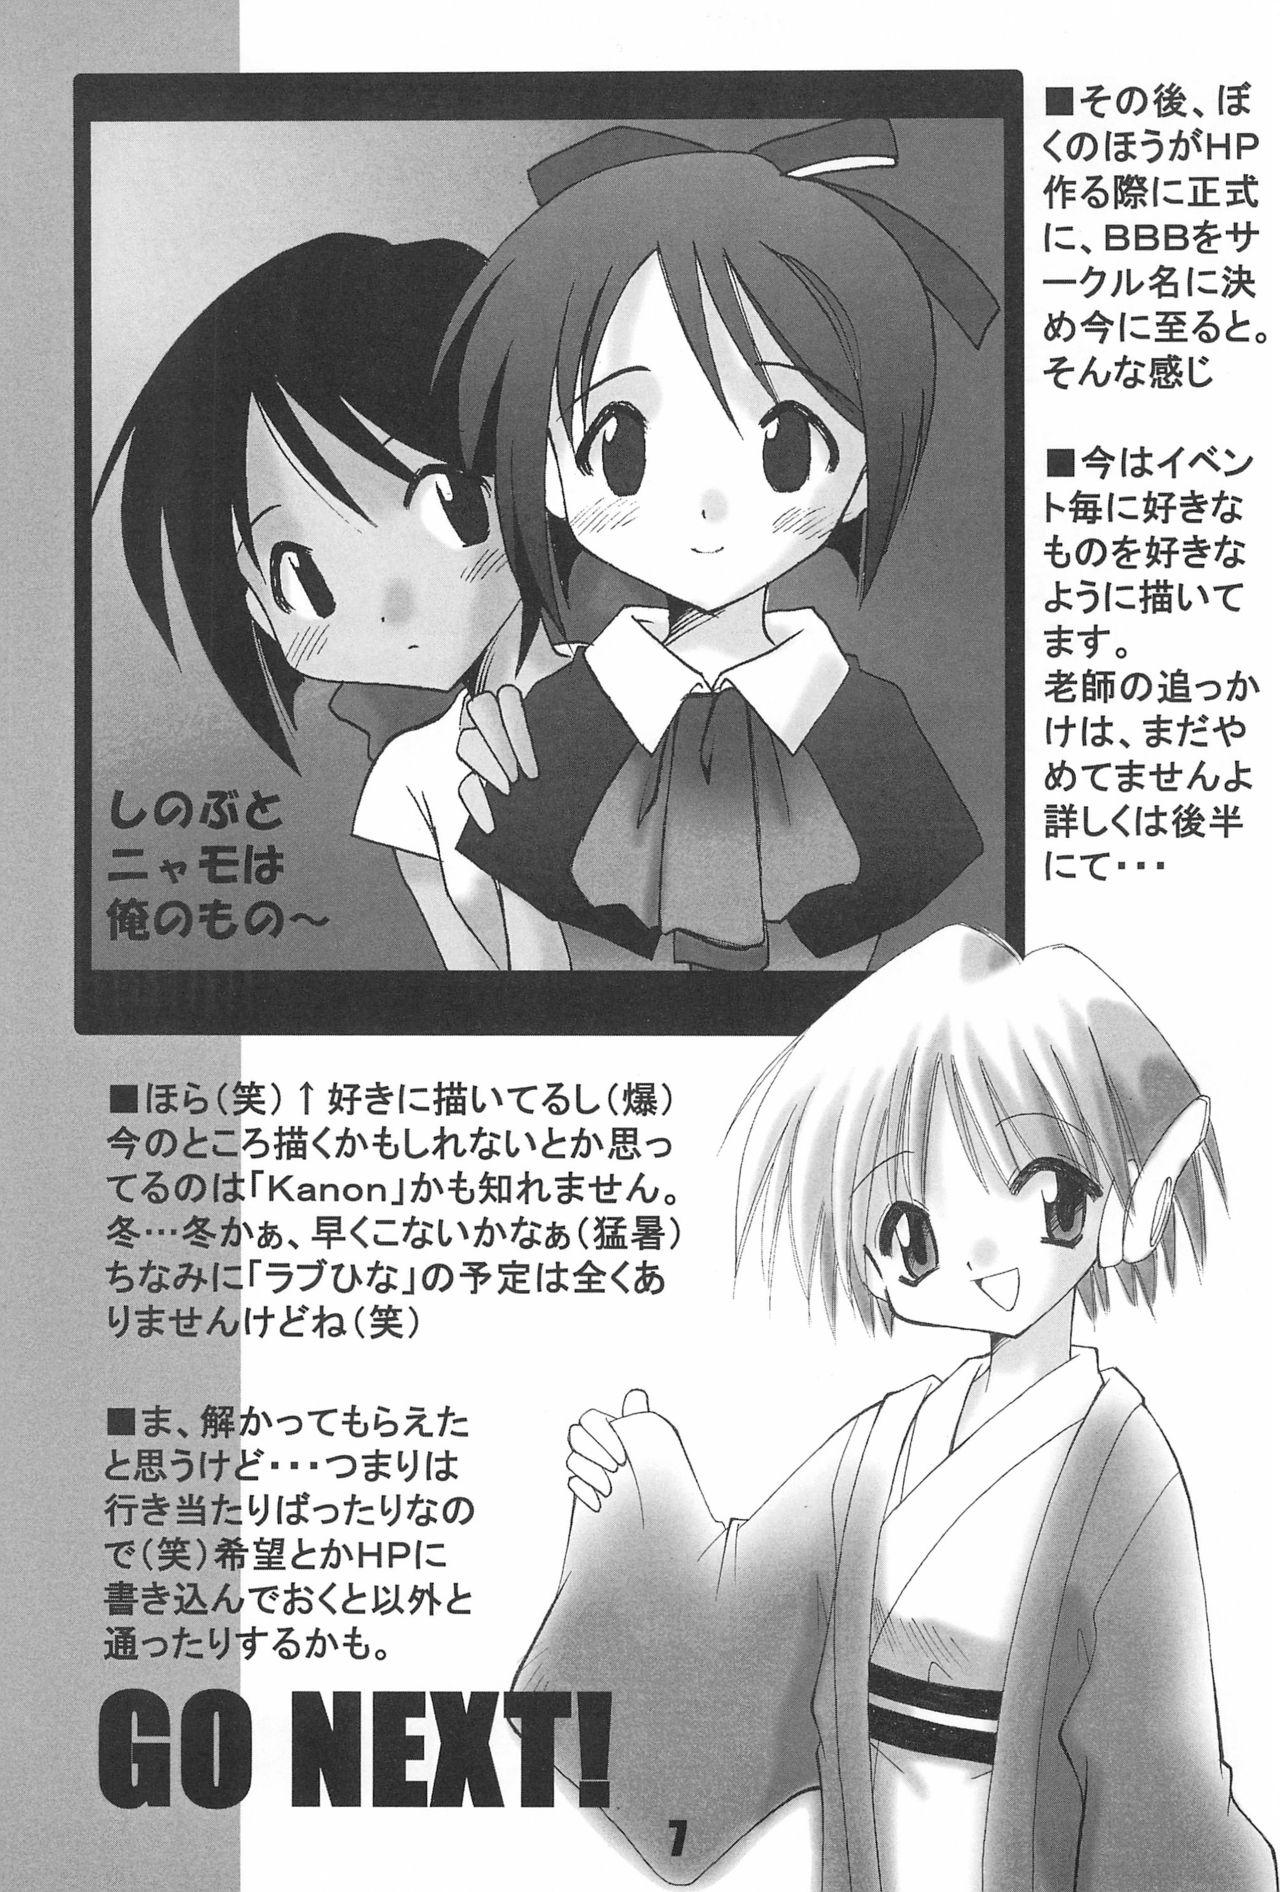 Blowing BBB OFFICIAL GUIDE BOOK - Cardcaptor sakura Negra - Page 7